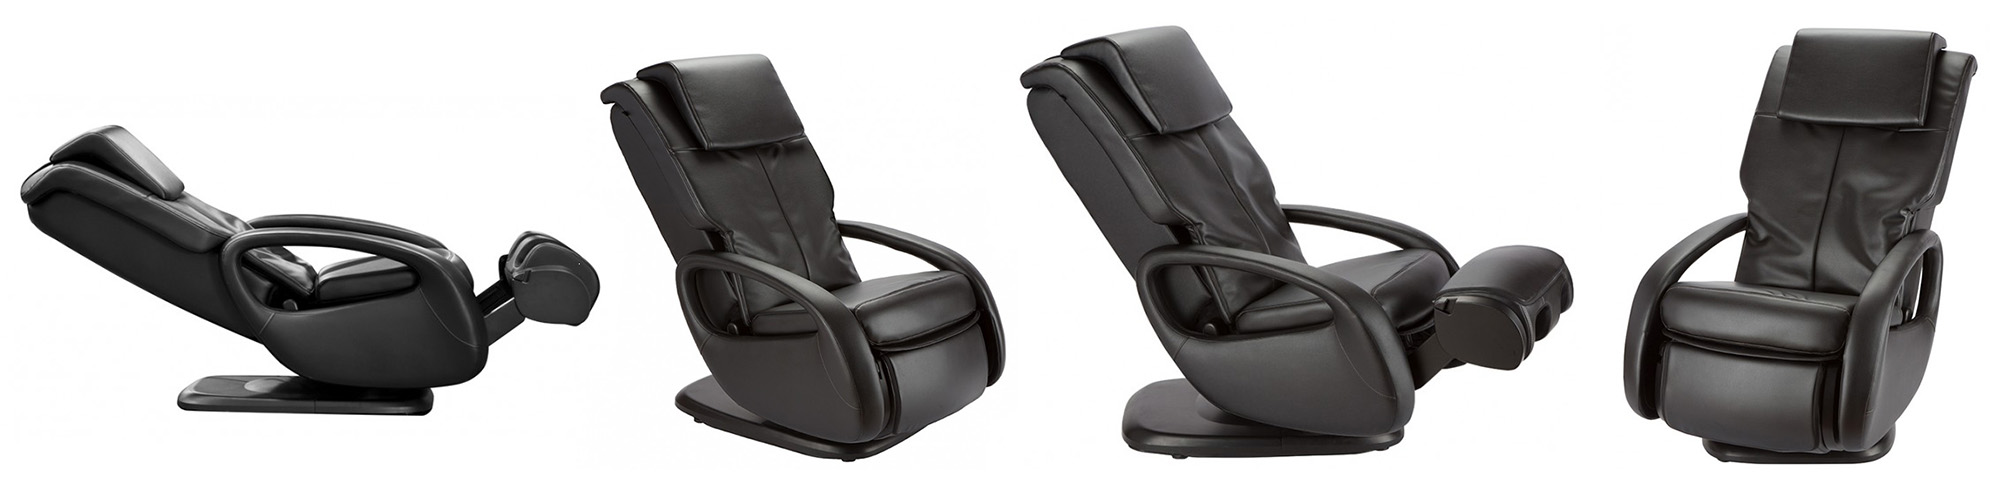 Wholebody 5 1 Massage Chair Recliner By Human Touch